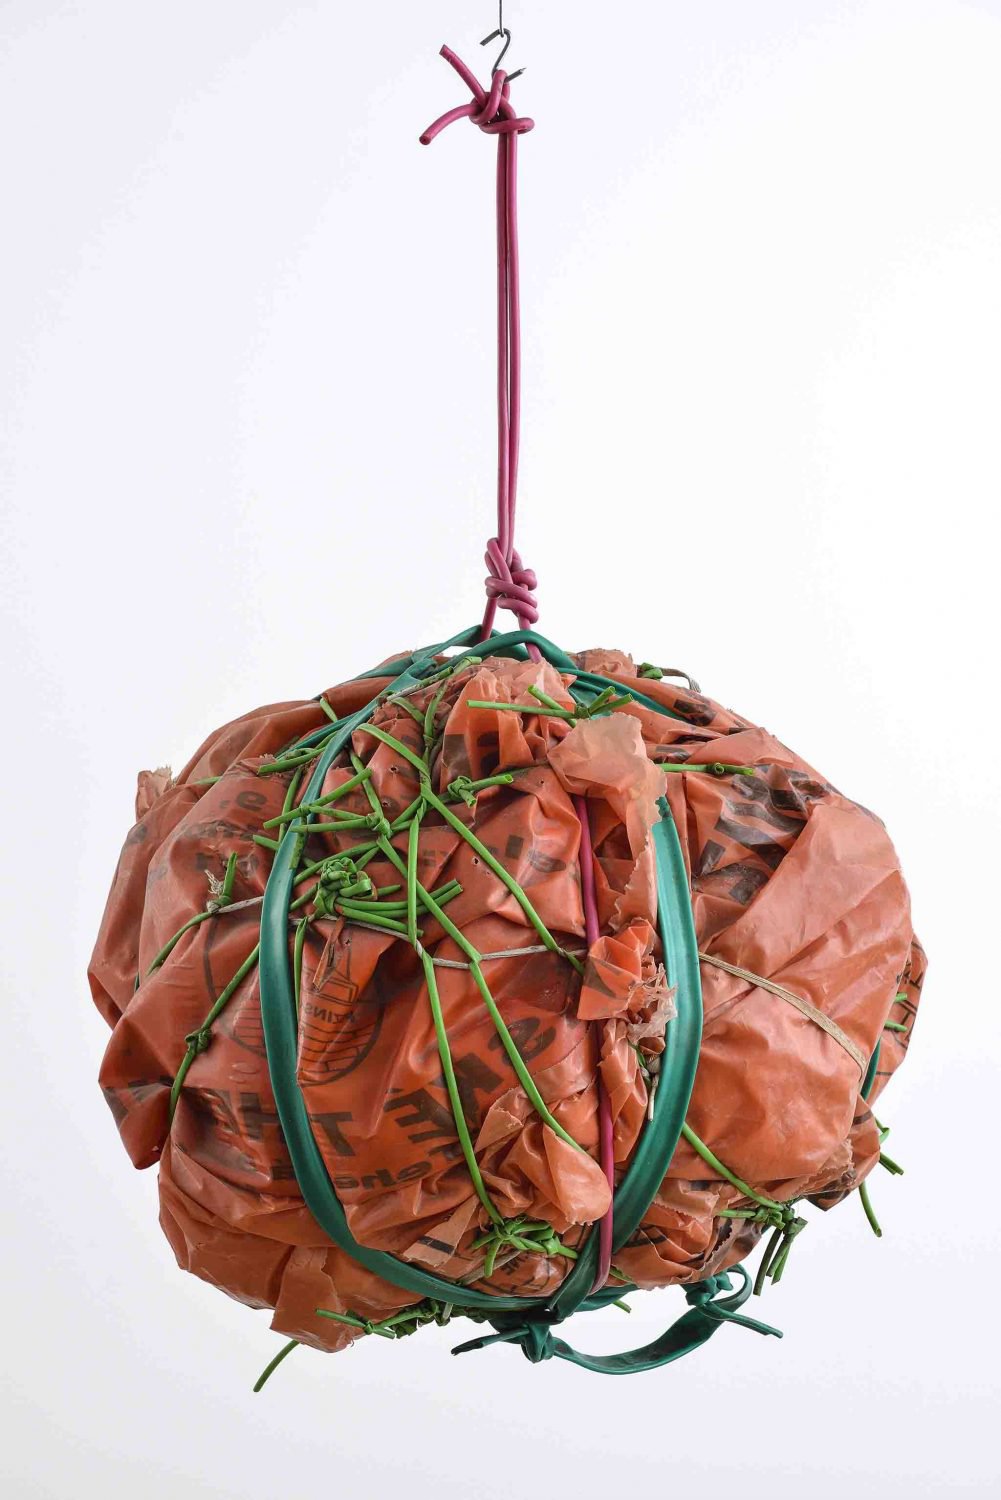 Stano FilkoCentral Brain, 2000Found objects, fabric, plastic, cord, wire70 x 55 x 55 cmOꓘ⅃Iꟻ OИATƧ, Layr, Rome, 2019